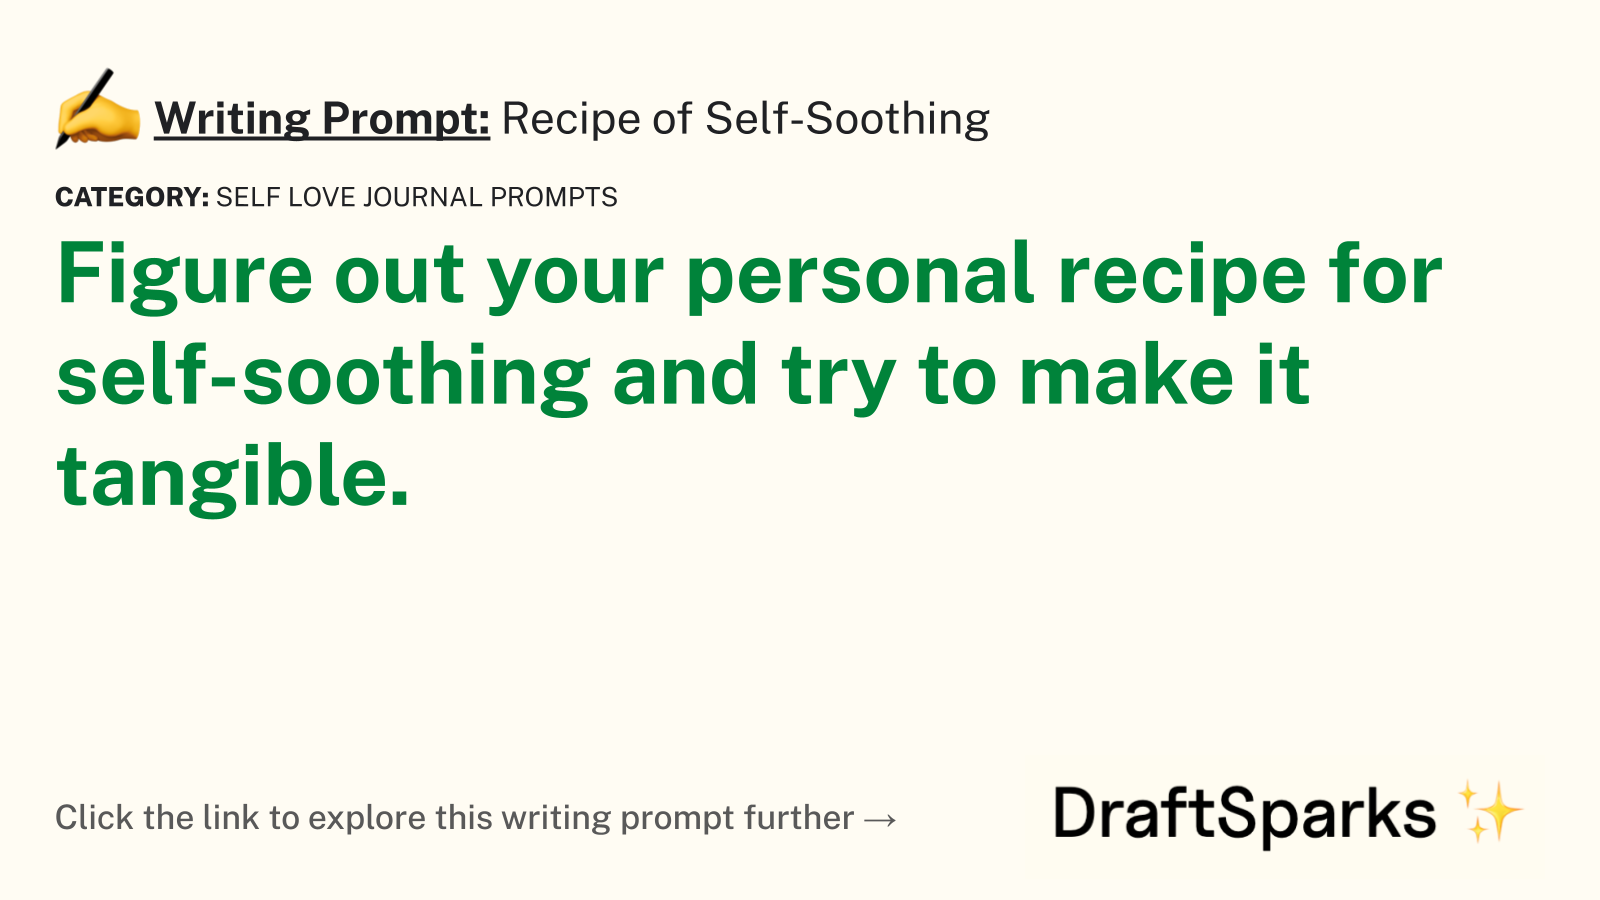 Recipe of Self-Soothing